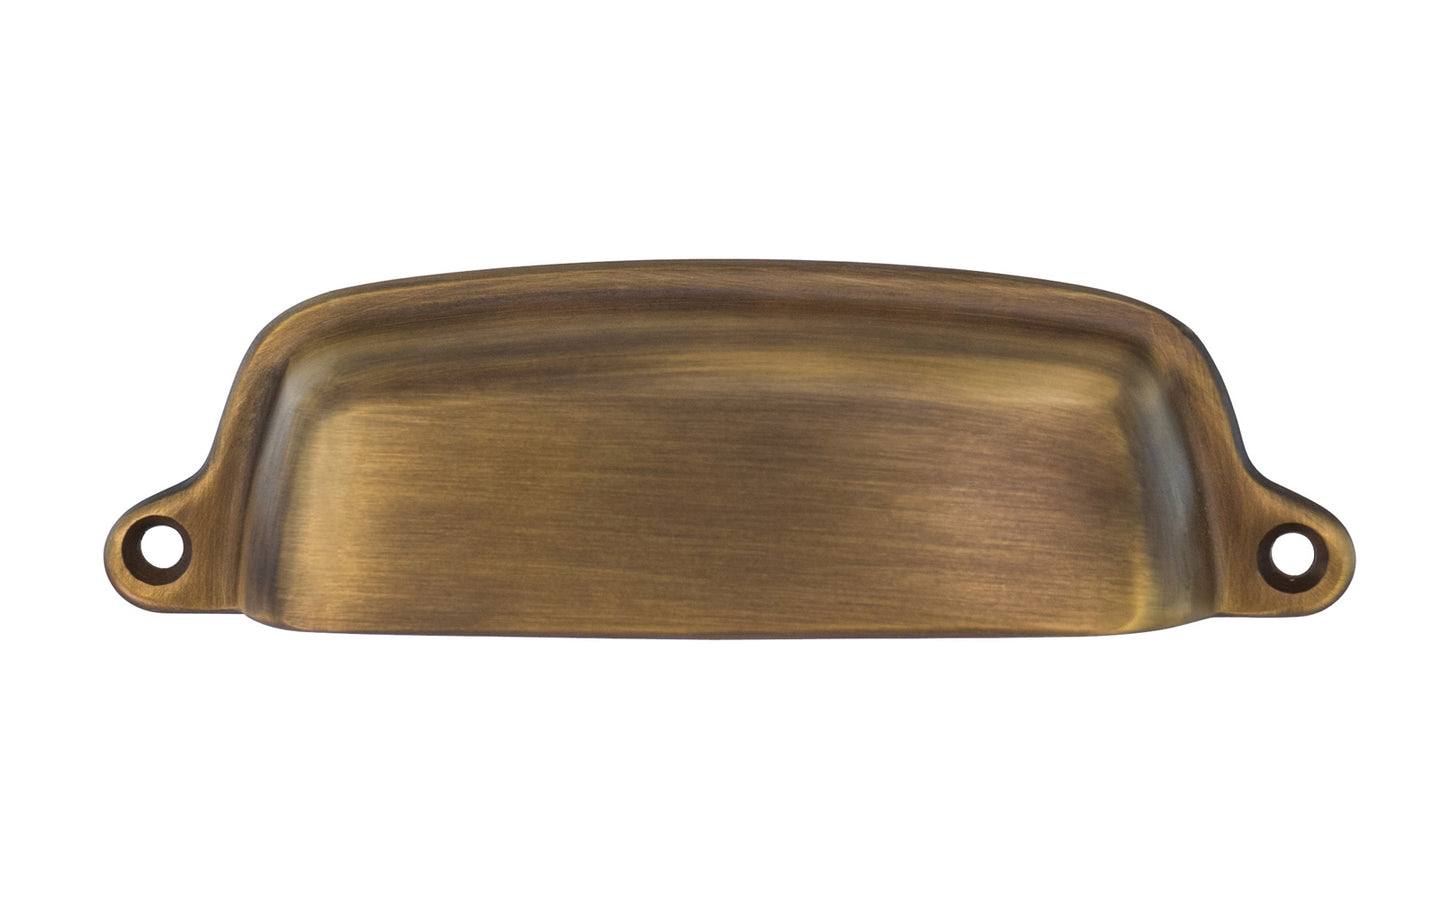 Vintage-style Hardware · Traditional & Classic Solid Brass Bin Pull. 4" On Centers. Made of high quality solid brass. 4" spacing of screw holes. Thick & smooth edges for a comfortable grip. Antique Brass Finish